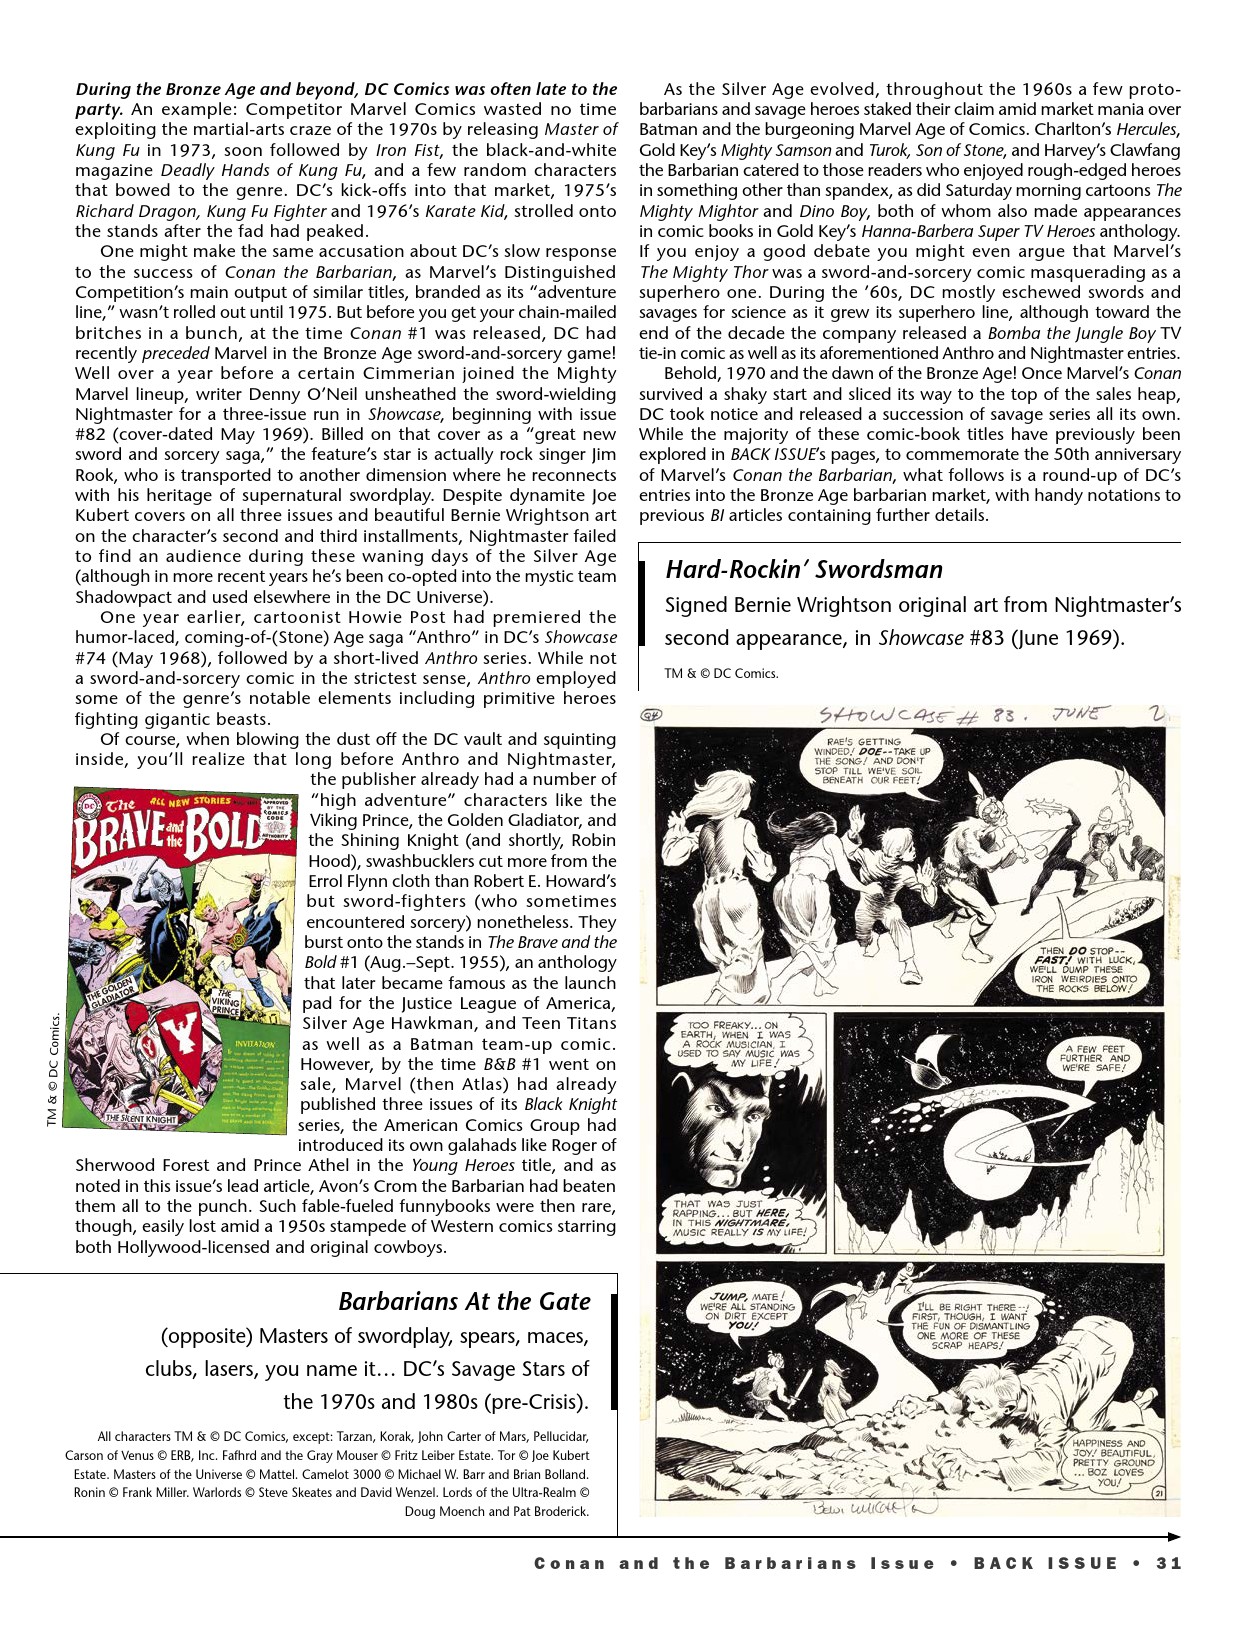 Read online Back Issue comic -  Issue #121 - 33